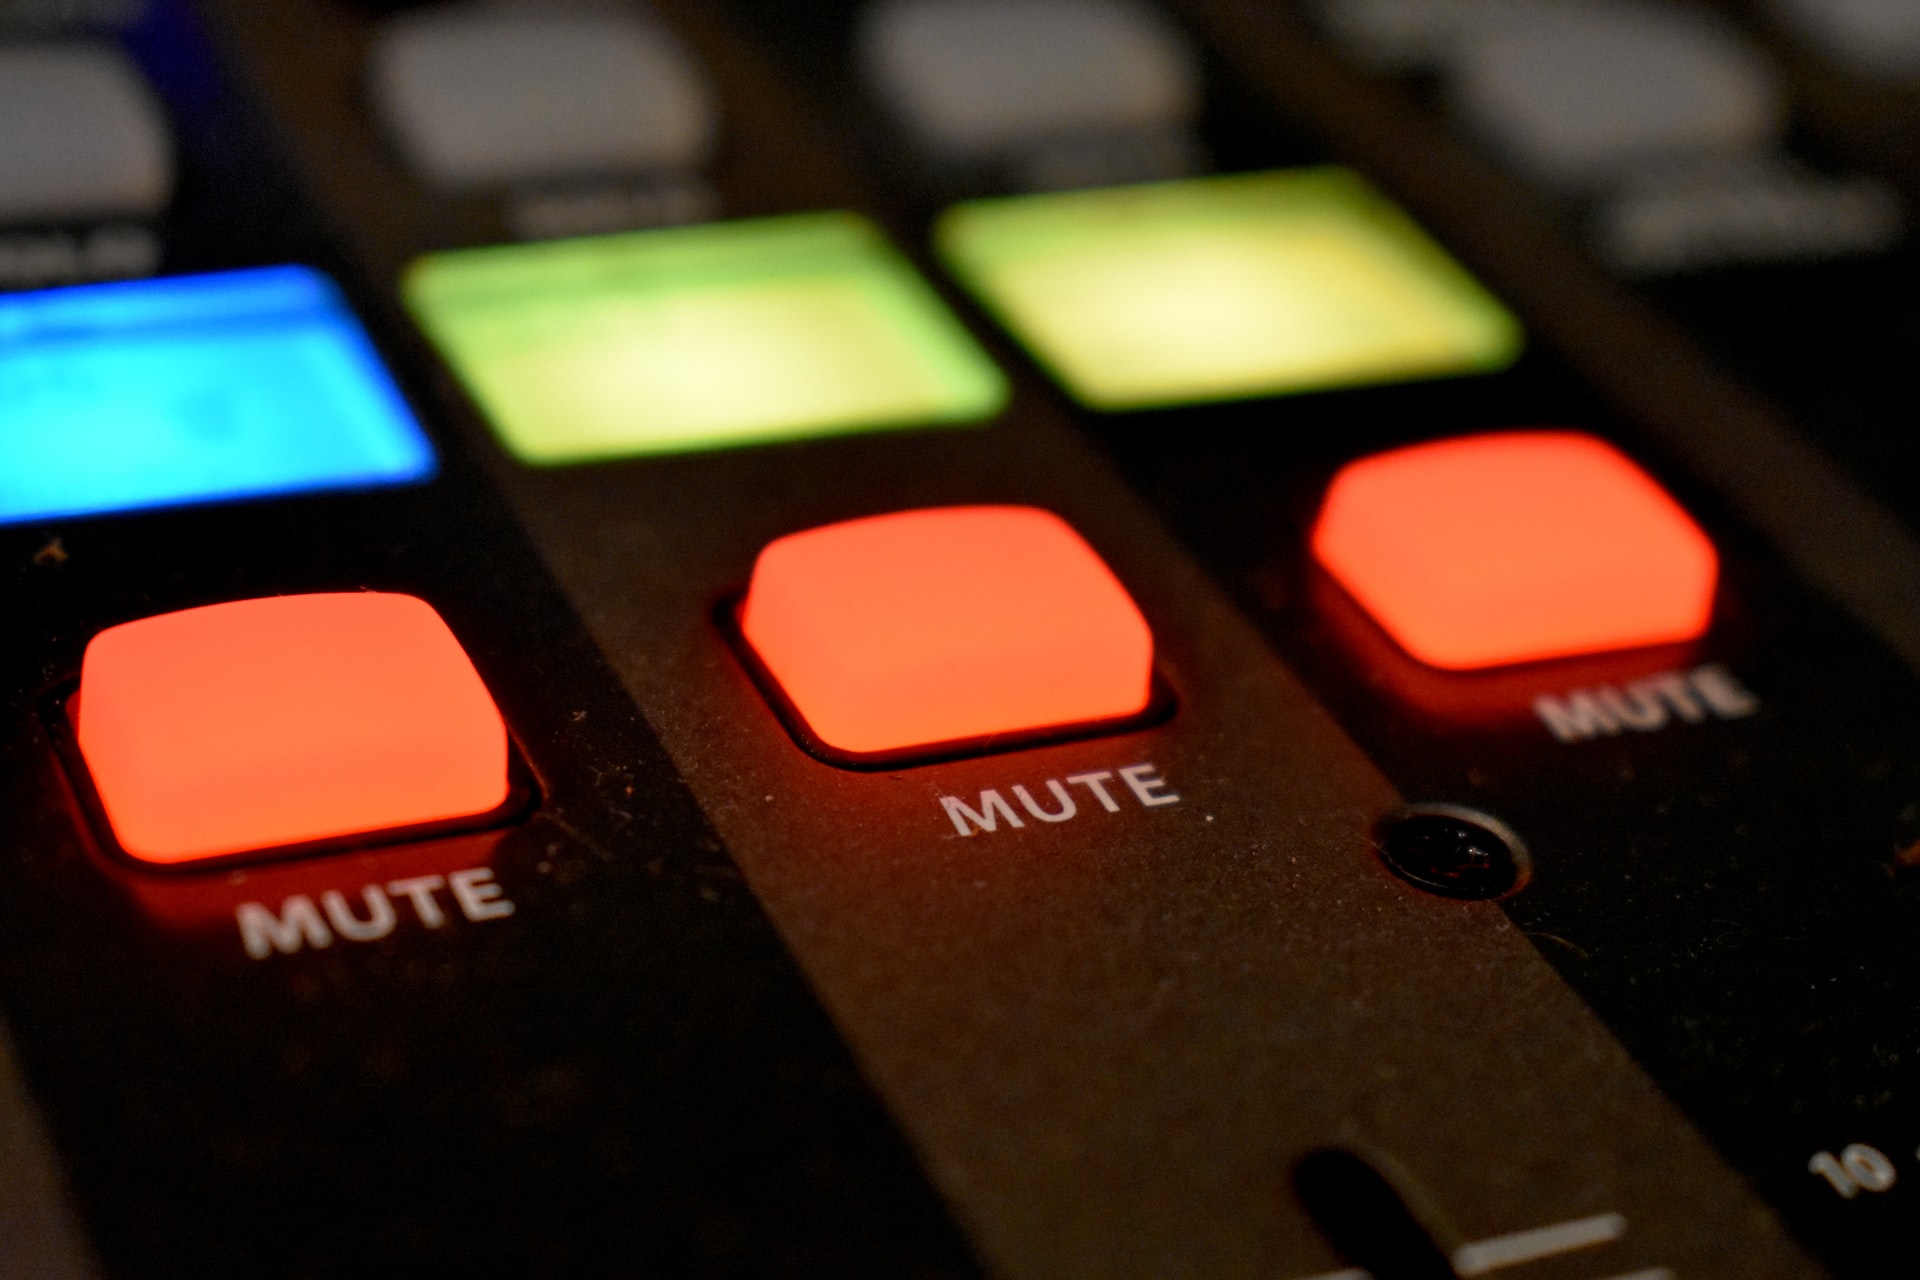 Mixing console with Mute leds